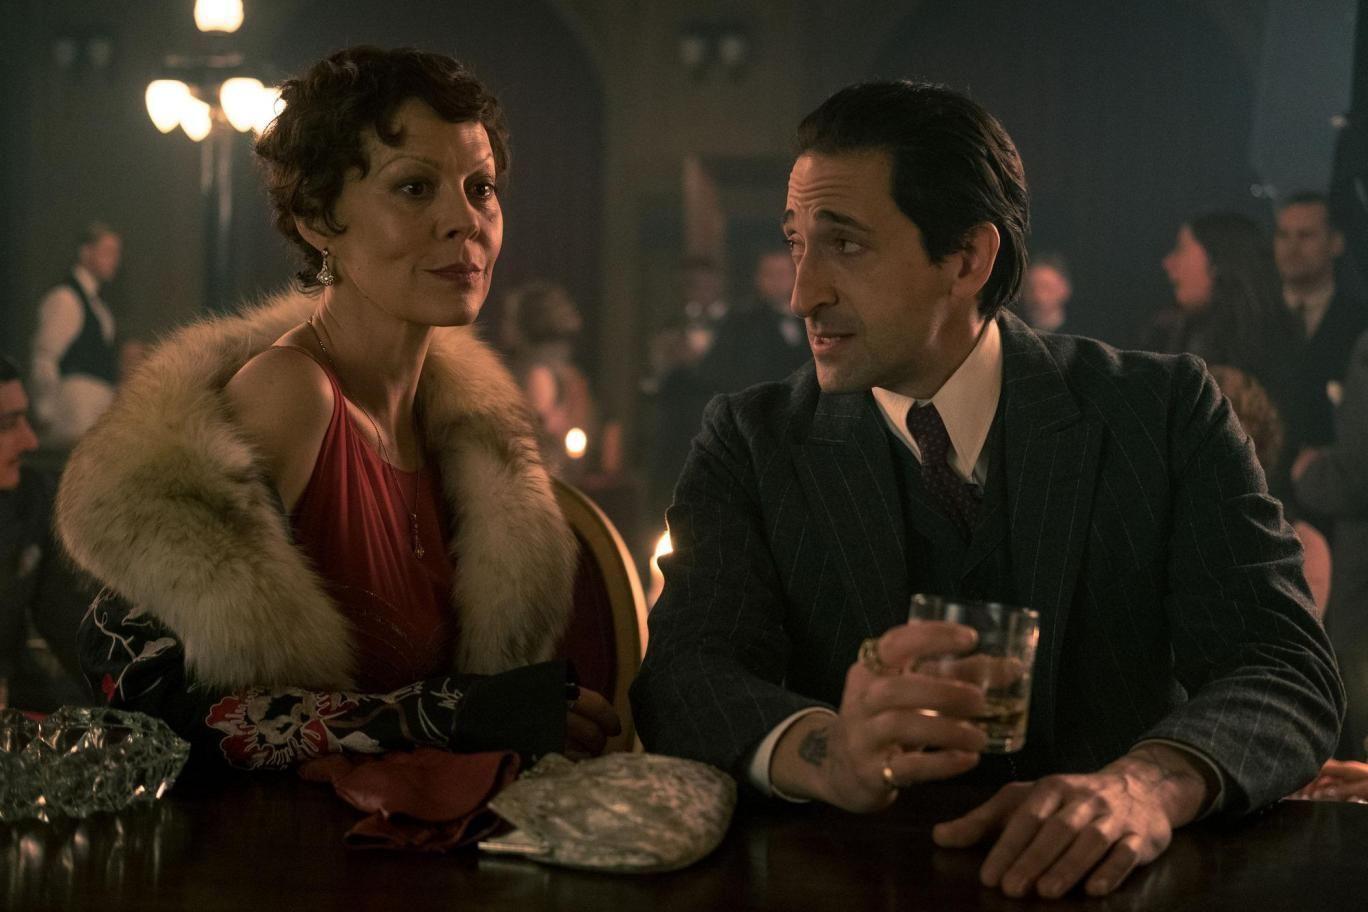 luca changretta and polly gray. Peaky Blinders in 2018